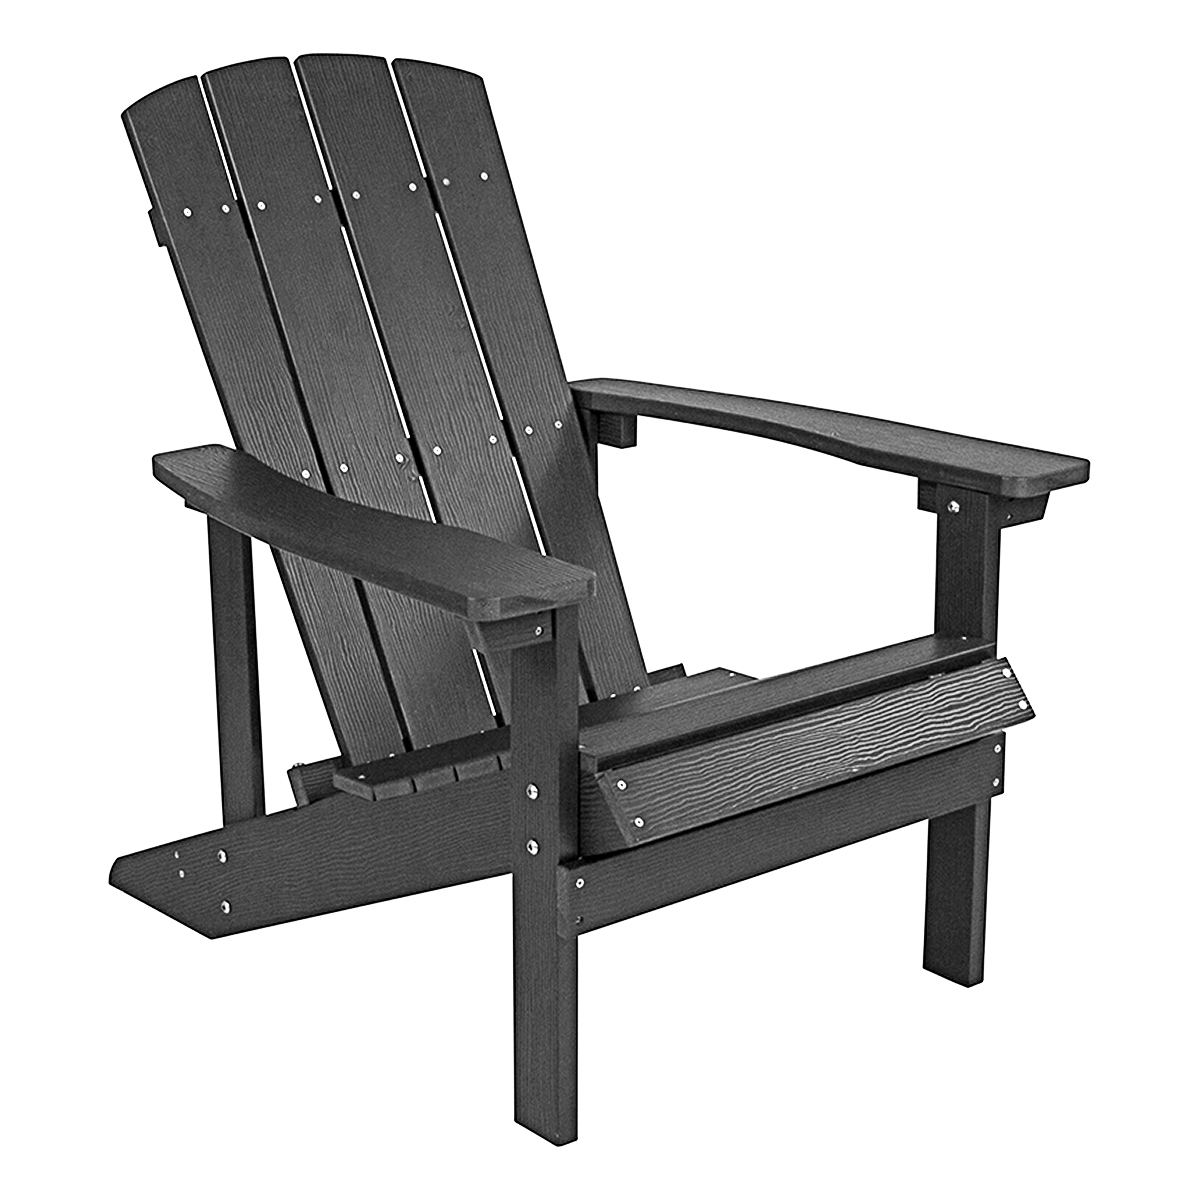 Slate Grey Adirondack Chair Composite Faux Wood Outdoor 